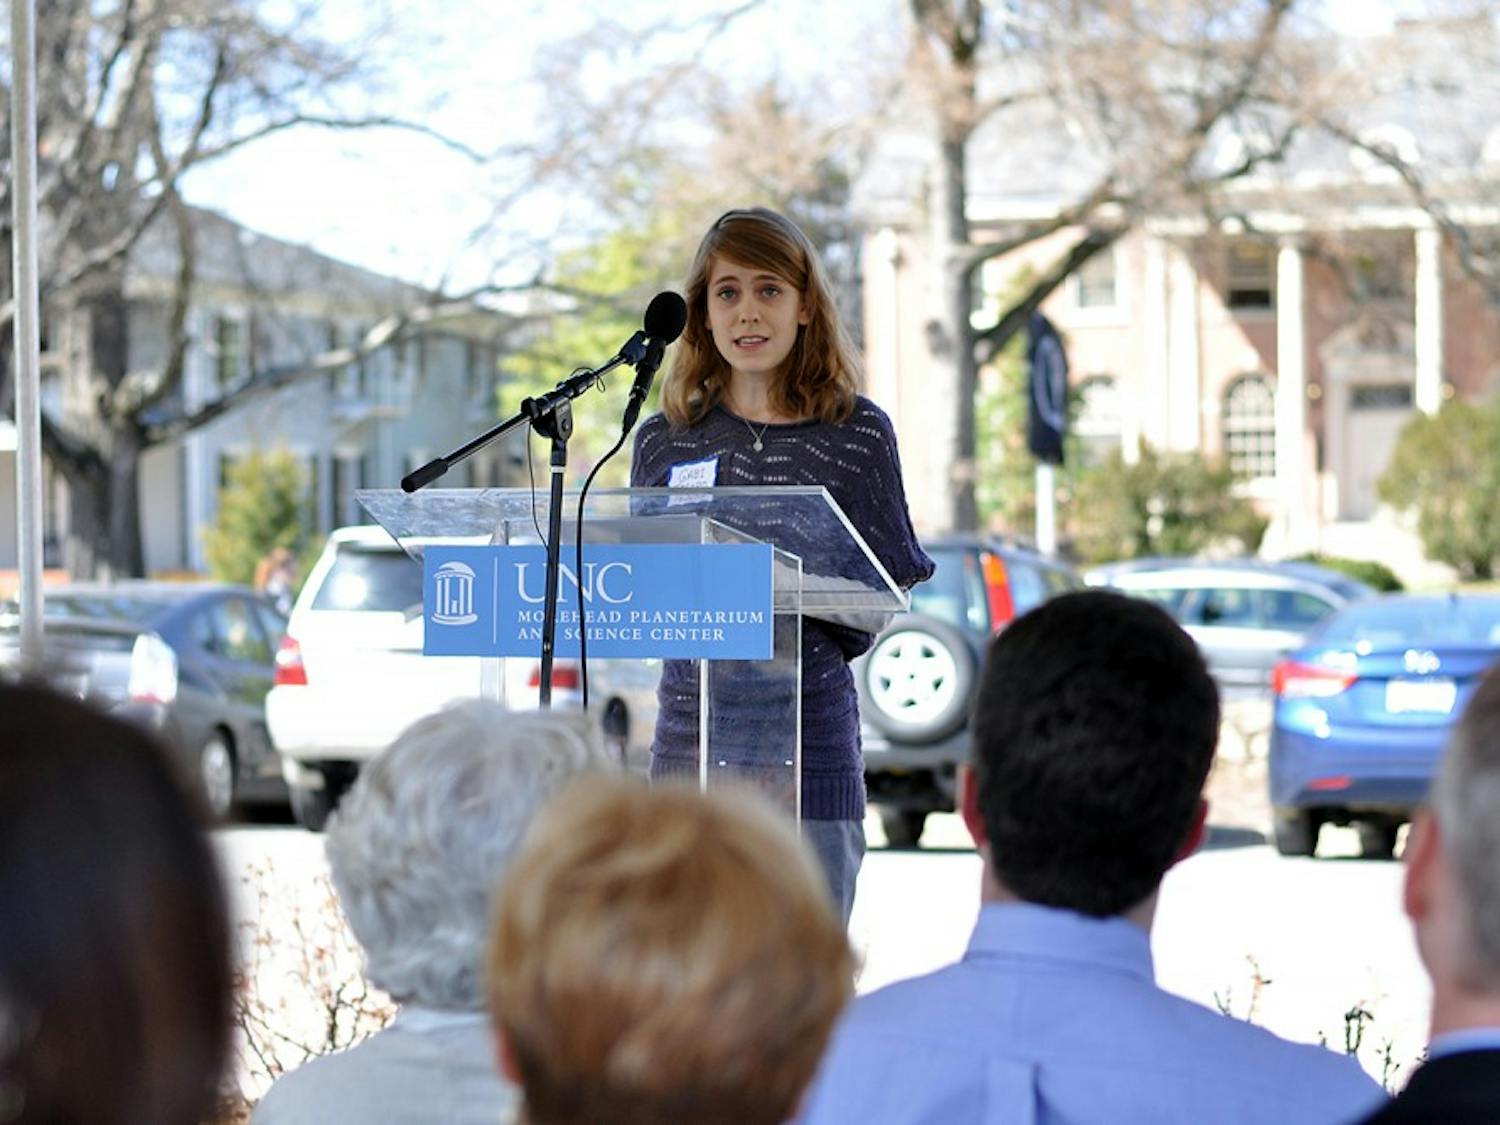 Gabi Tesoro, 16, spoke on behalf of her grandfather Richard Knapp, former astronaut educator at the Morehead Planetarium, at the NC Highway Historical Marker Dedication Ceremony outside the Morehead Planetarium and Science Center on Wednesday. 